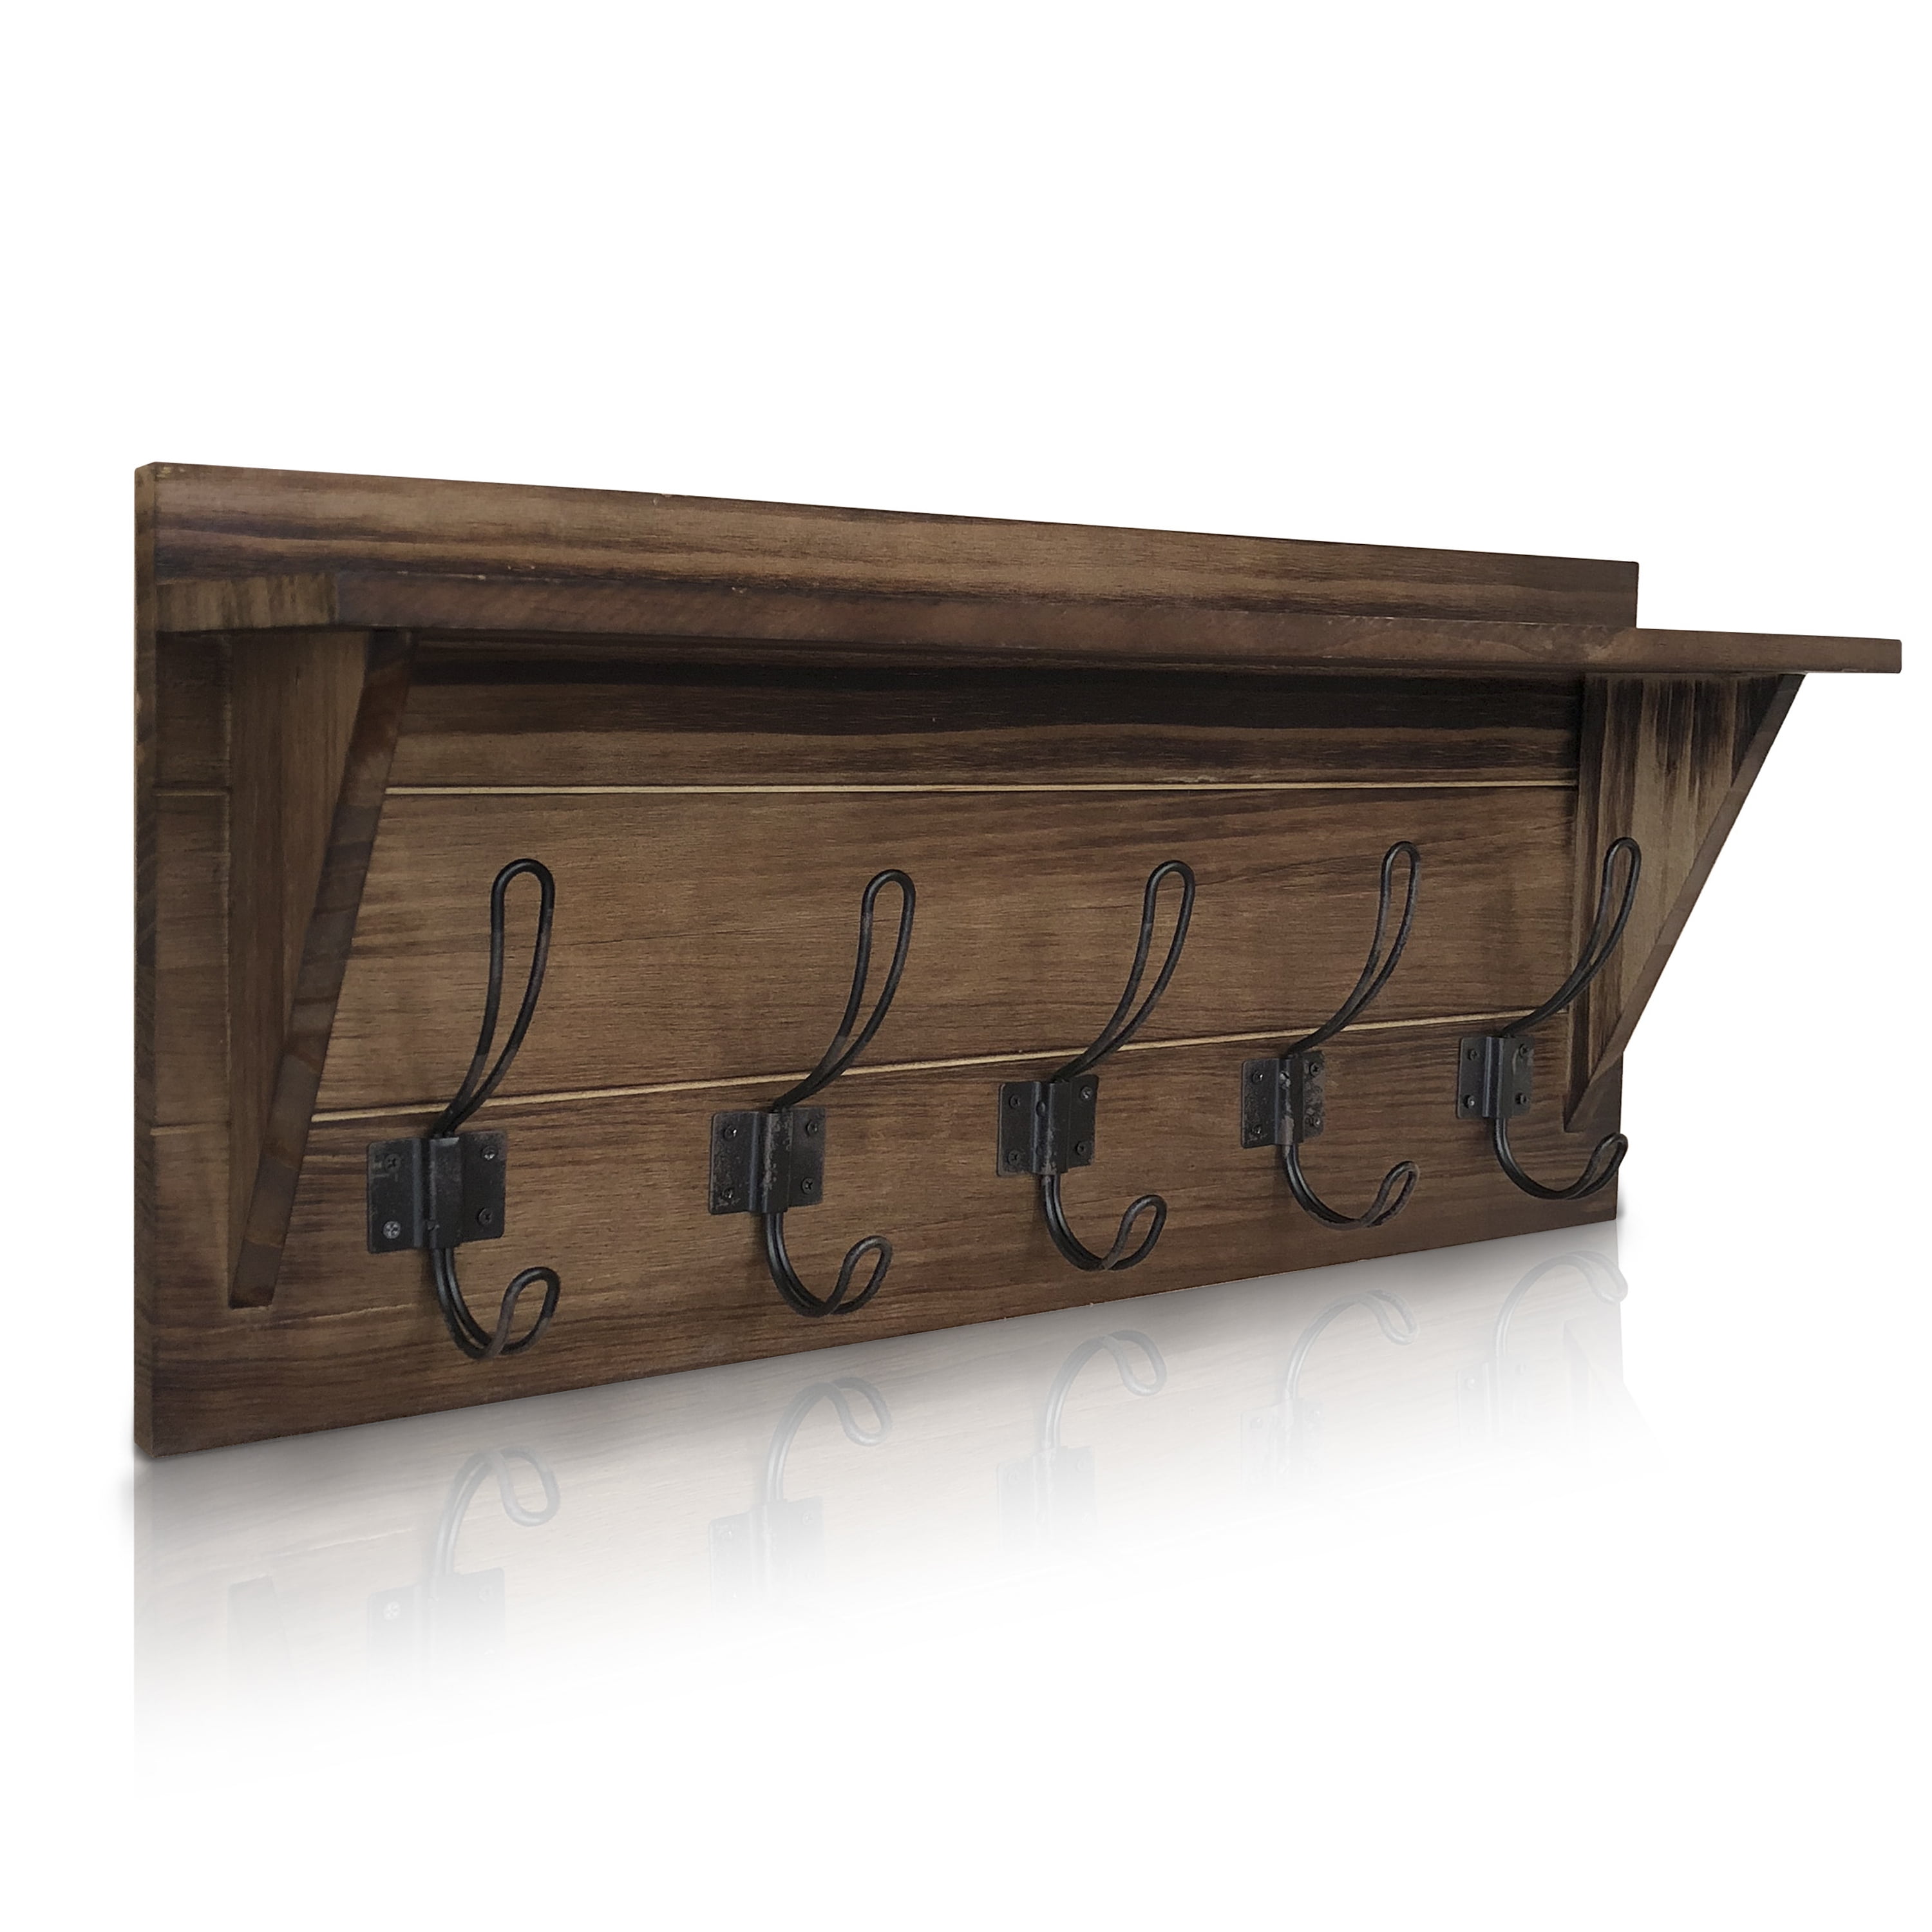 HBCY Creations Wall Mounted Shelf with Coat Hooks and Baskets, Solid Wood  Entryway Organizer Wall Shelf with Hooks - Hang Coats, Keys or Coffee Mugs